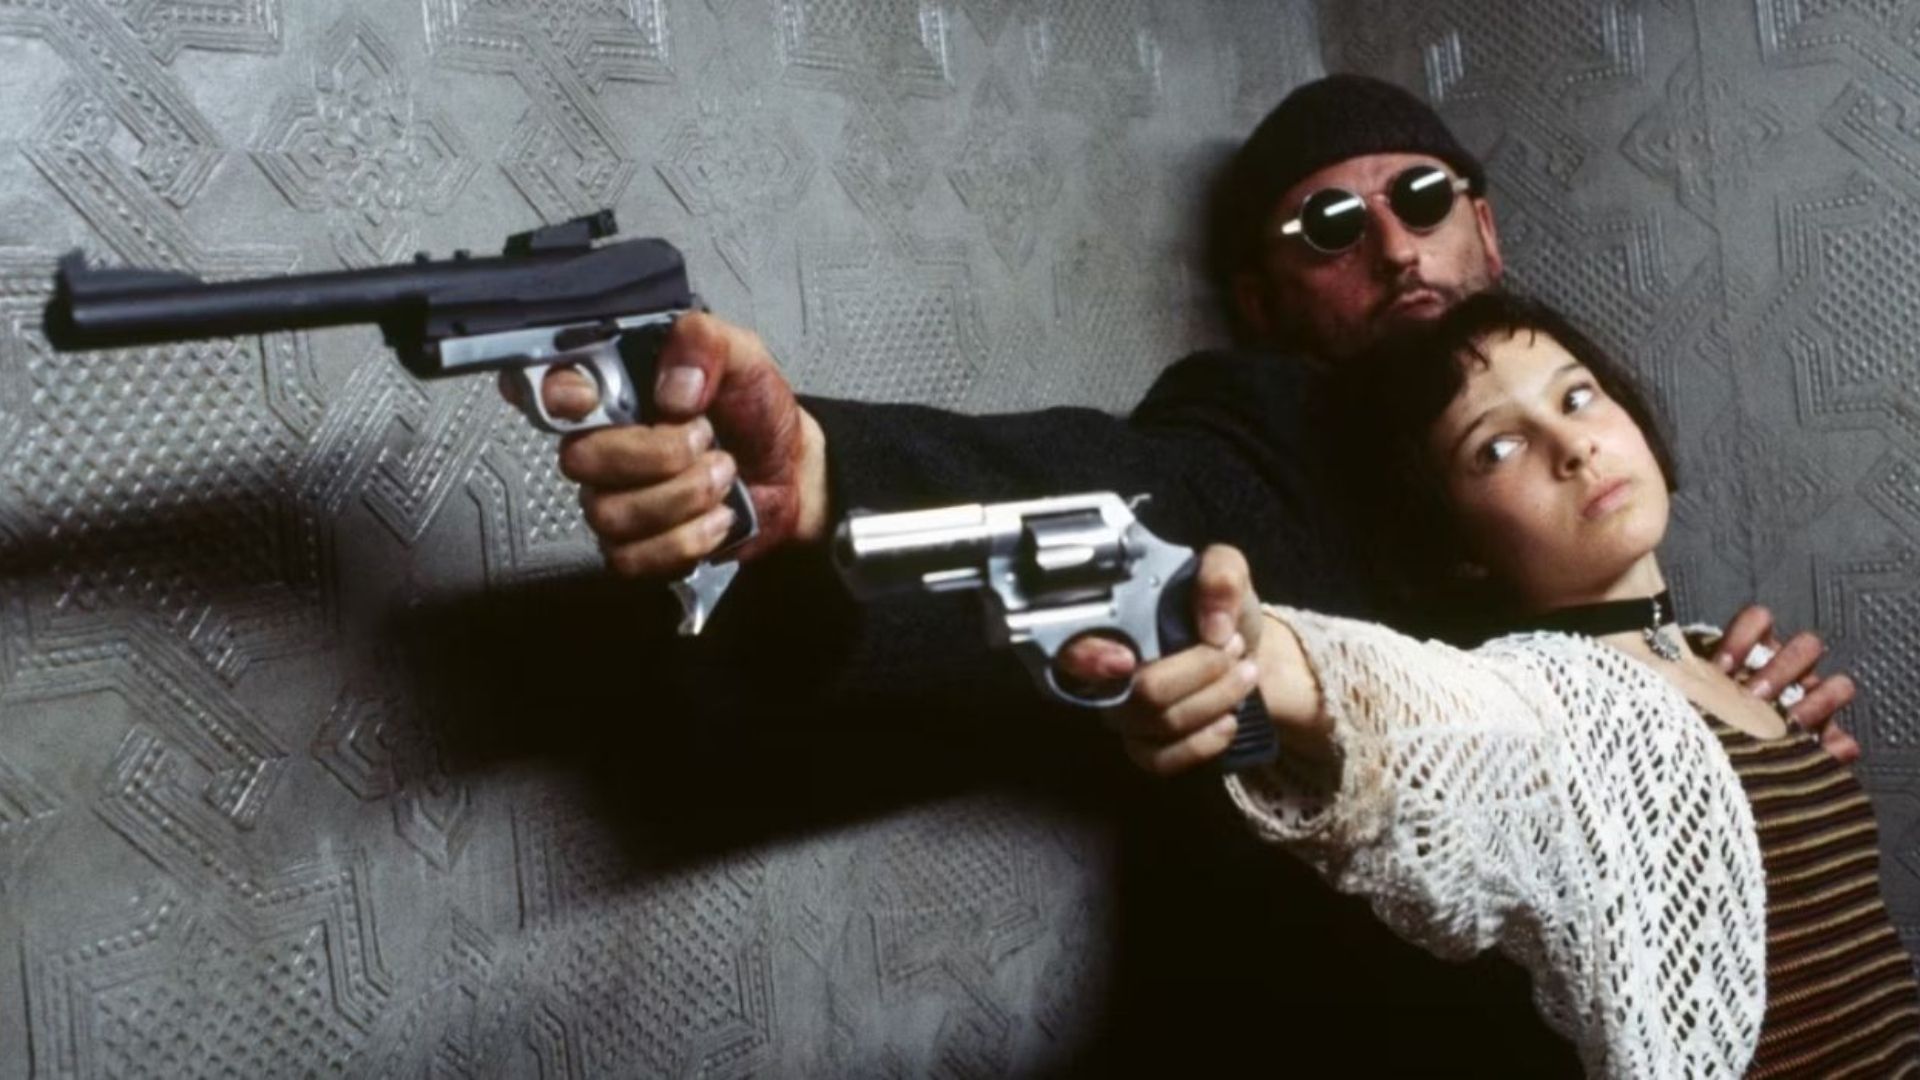 Jean Reno as Leon and Natalie Portman as Mathilda pointing guns together in Léon: The Professional